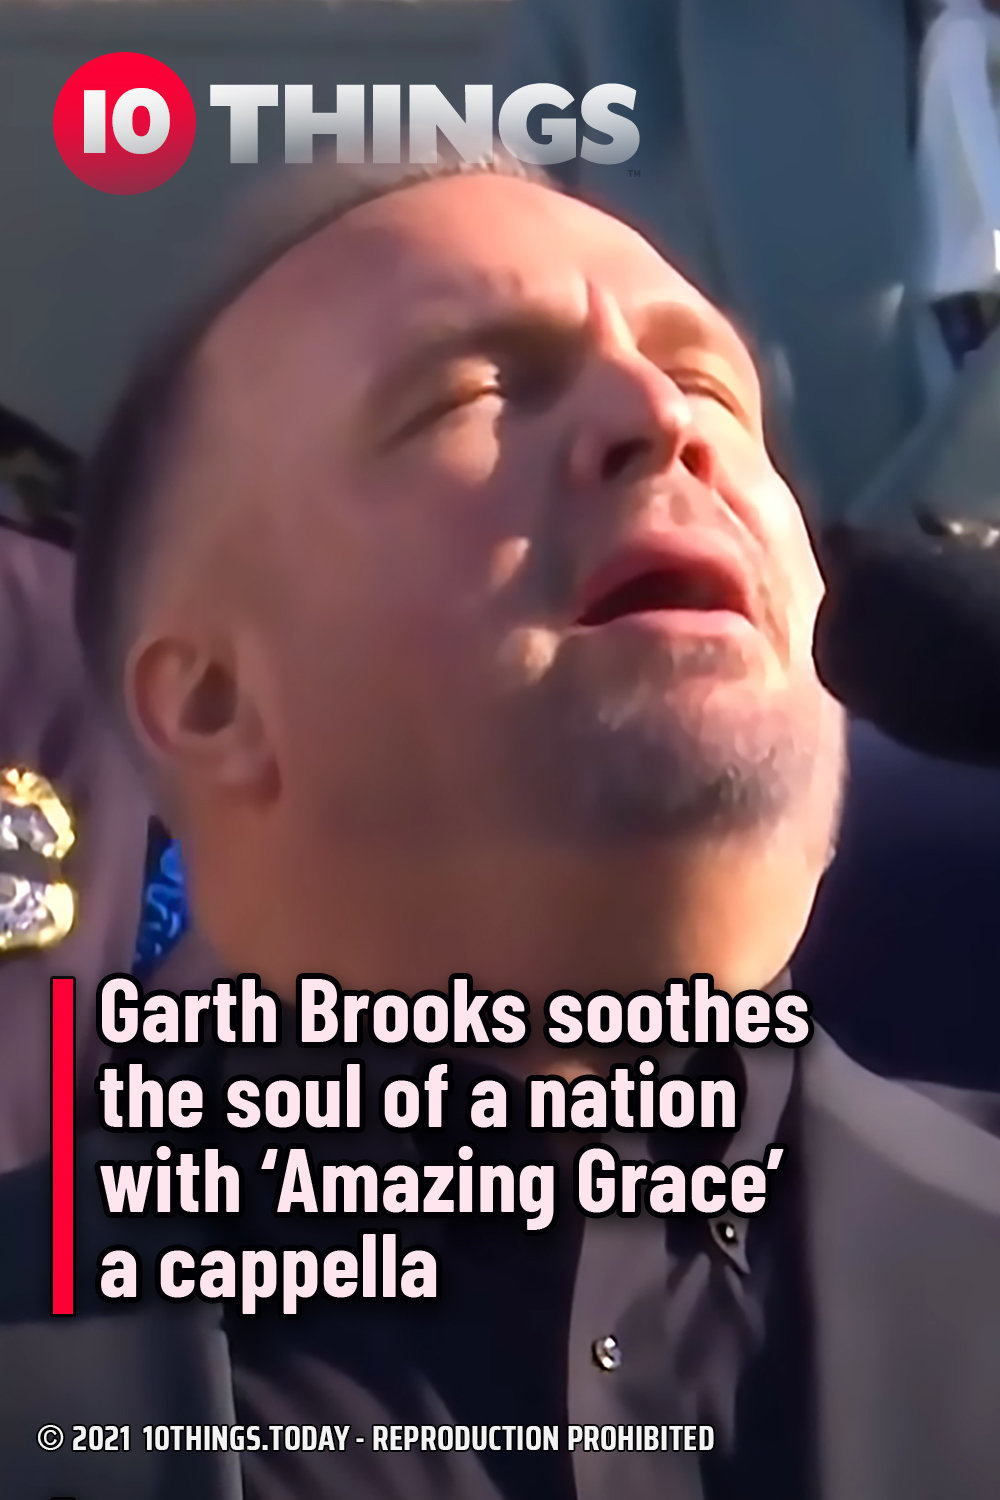 Garth Brooks soothes the soul of a nation with ‘Amazing Grace’ a cappella